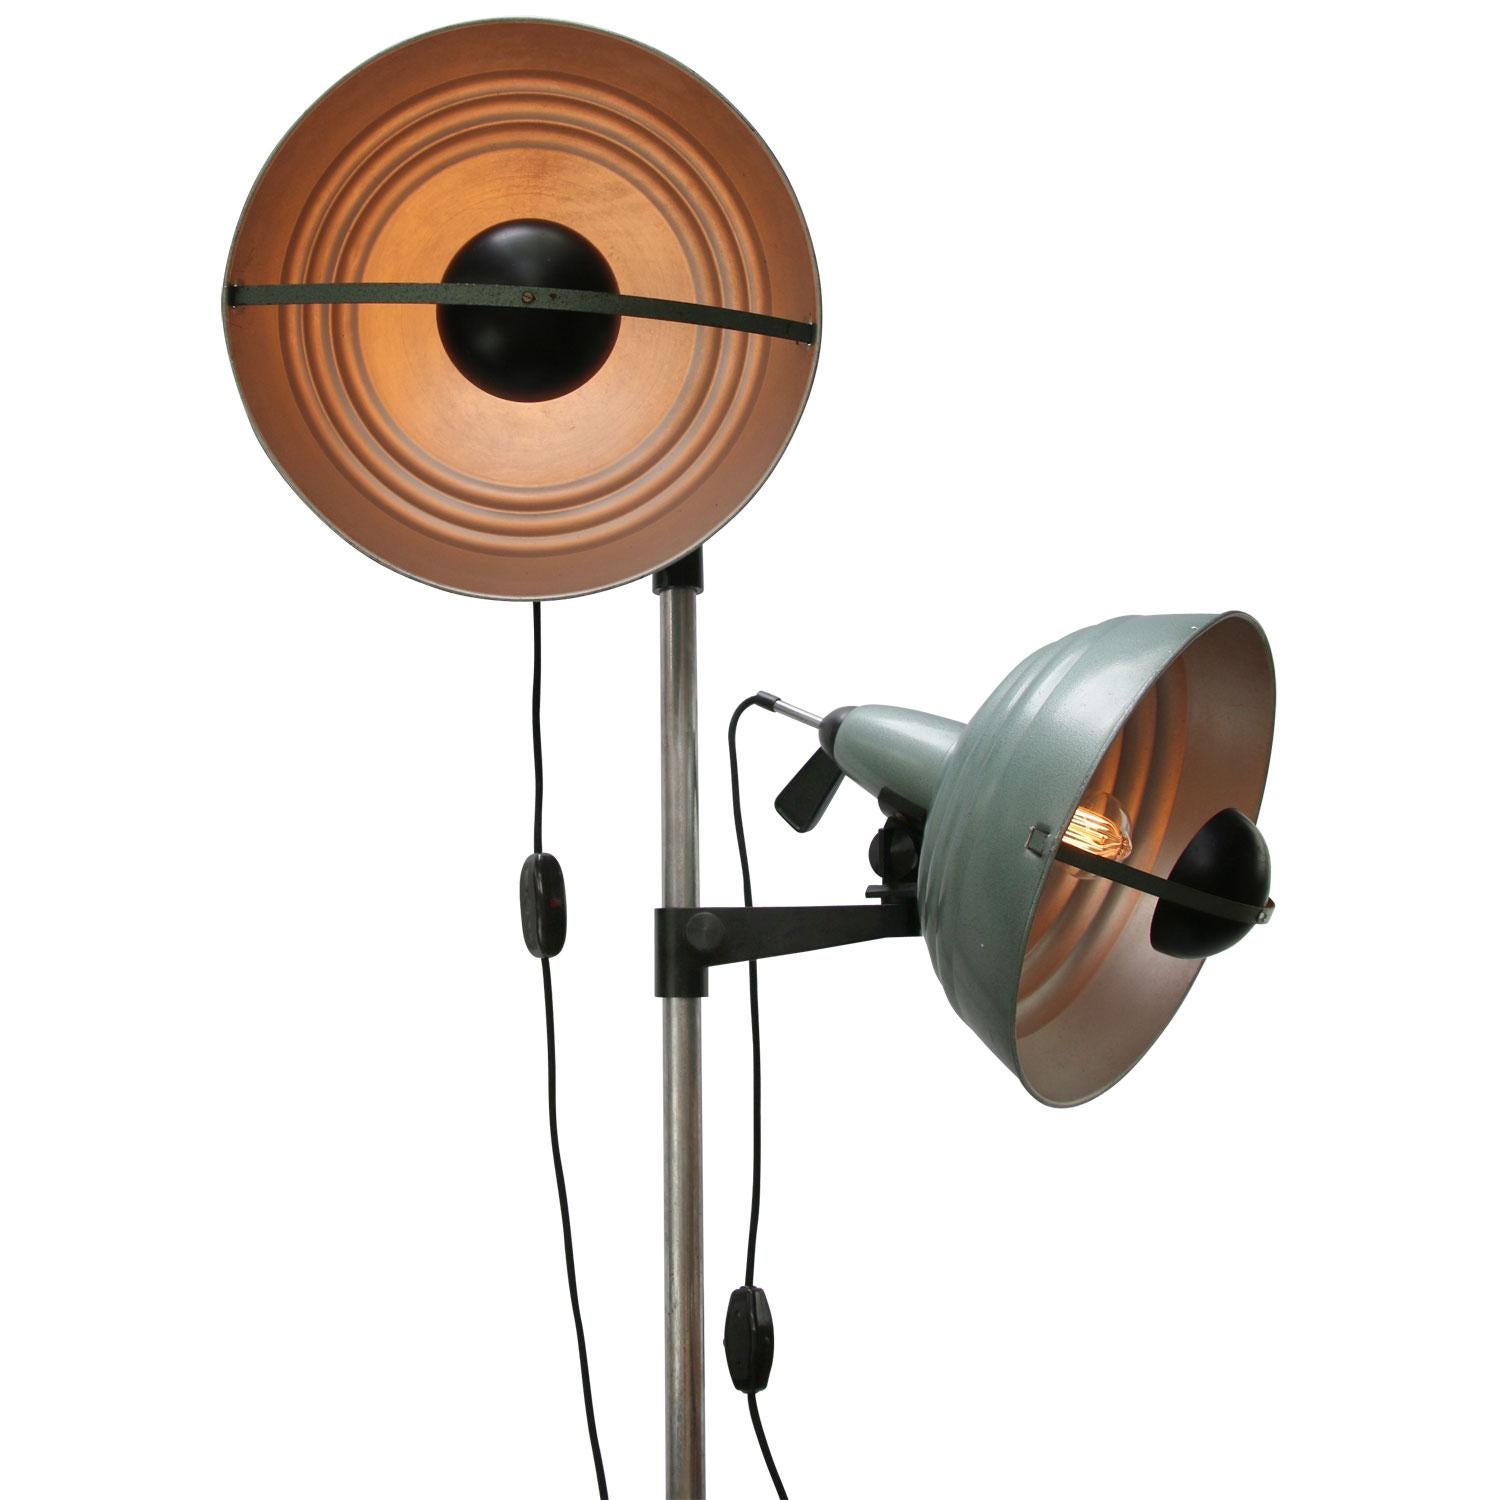 Italian photo Film Studio spot lights on metal stand
Adjustable in height and angle.

Measures: Diameter base 50 cm

Electra wire 4 meter, on/of switch and plugs.

Weight: 8.50 kg / 18.7 lb

Priced per individual item. All lamps have been